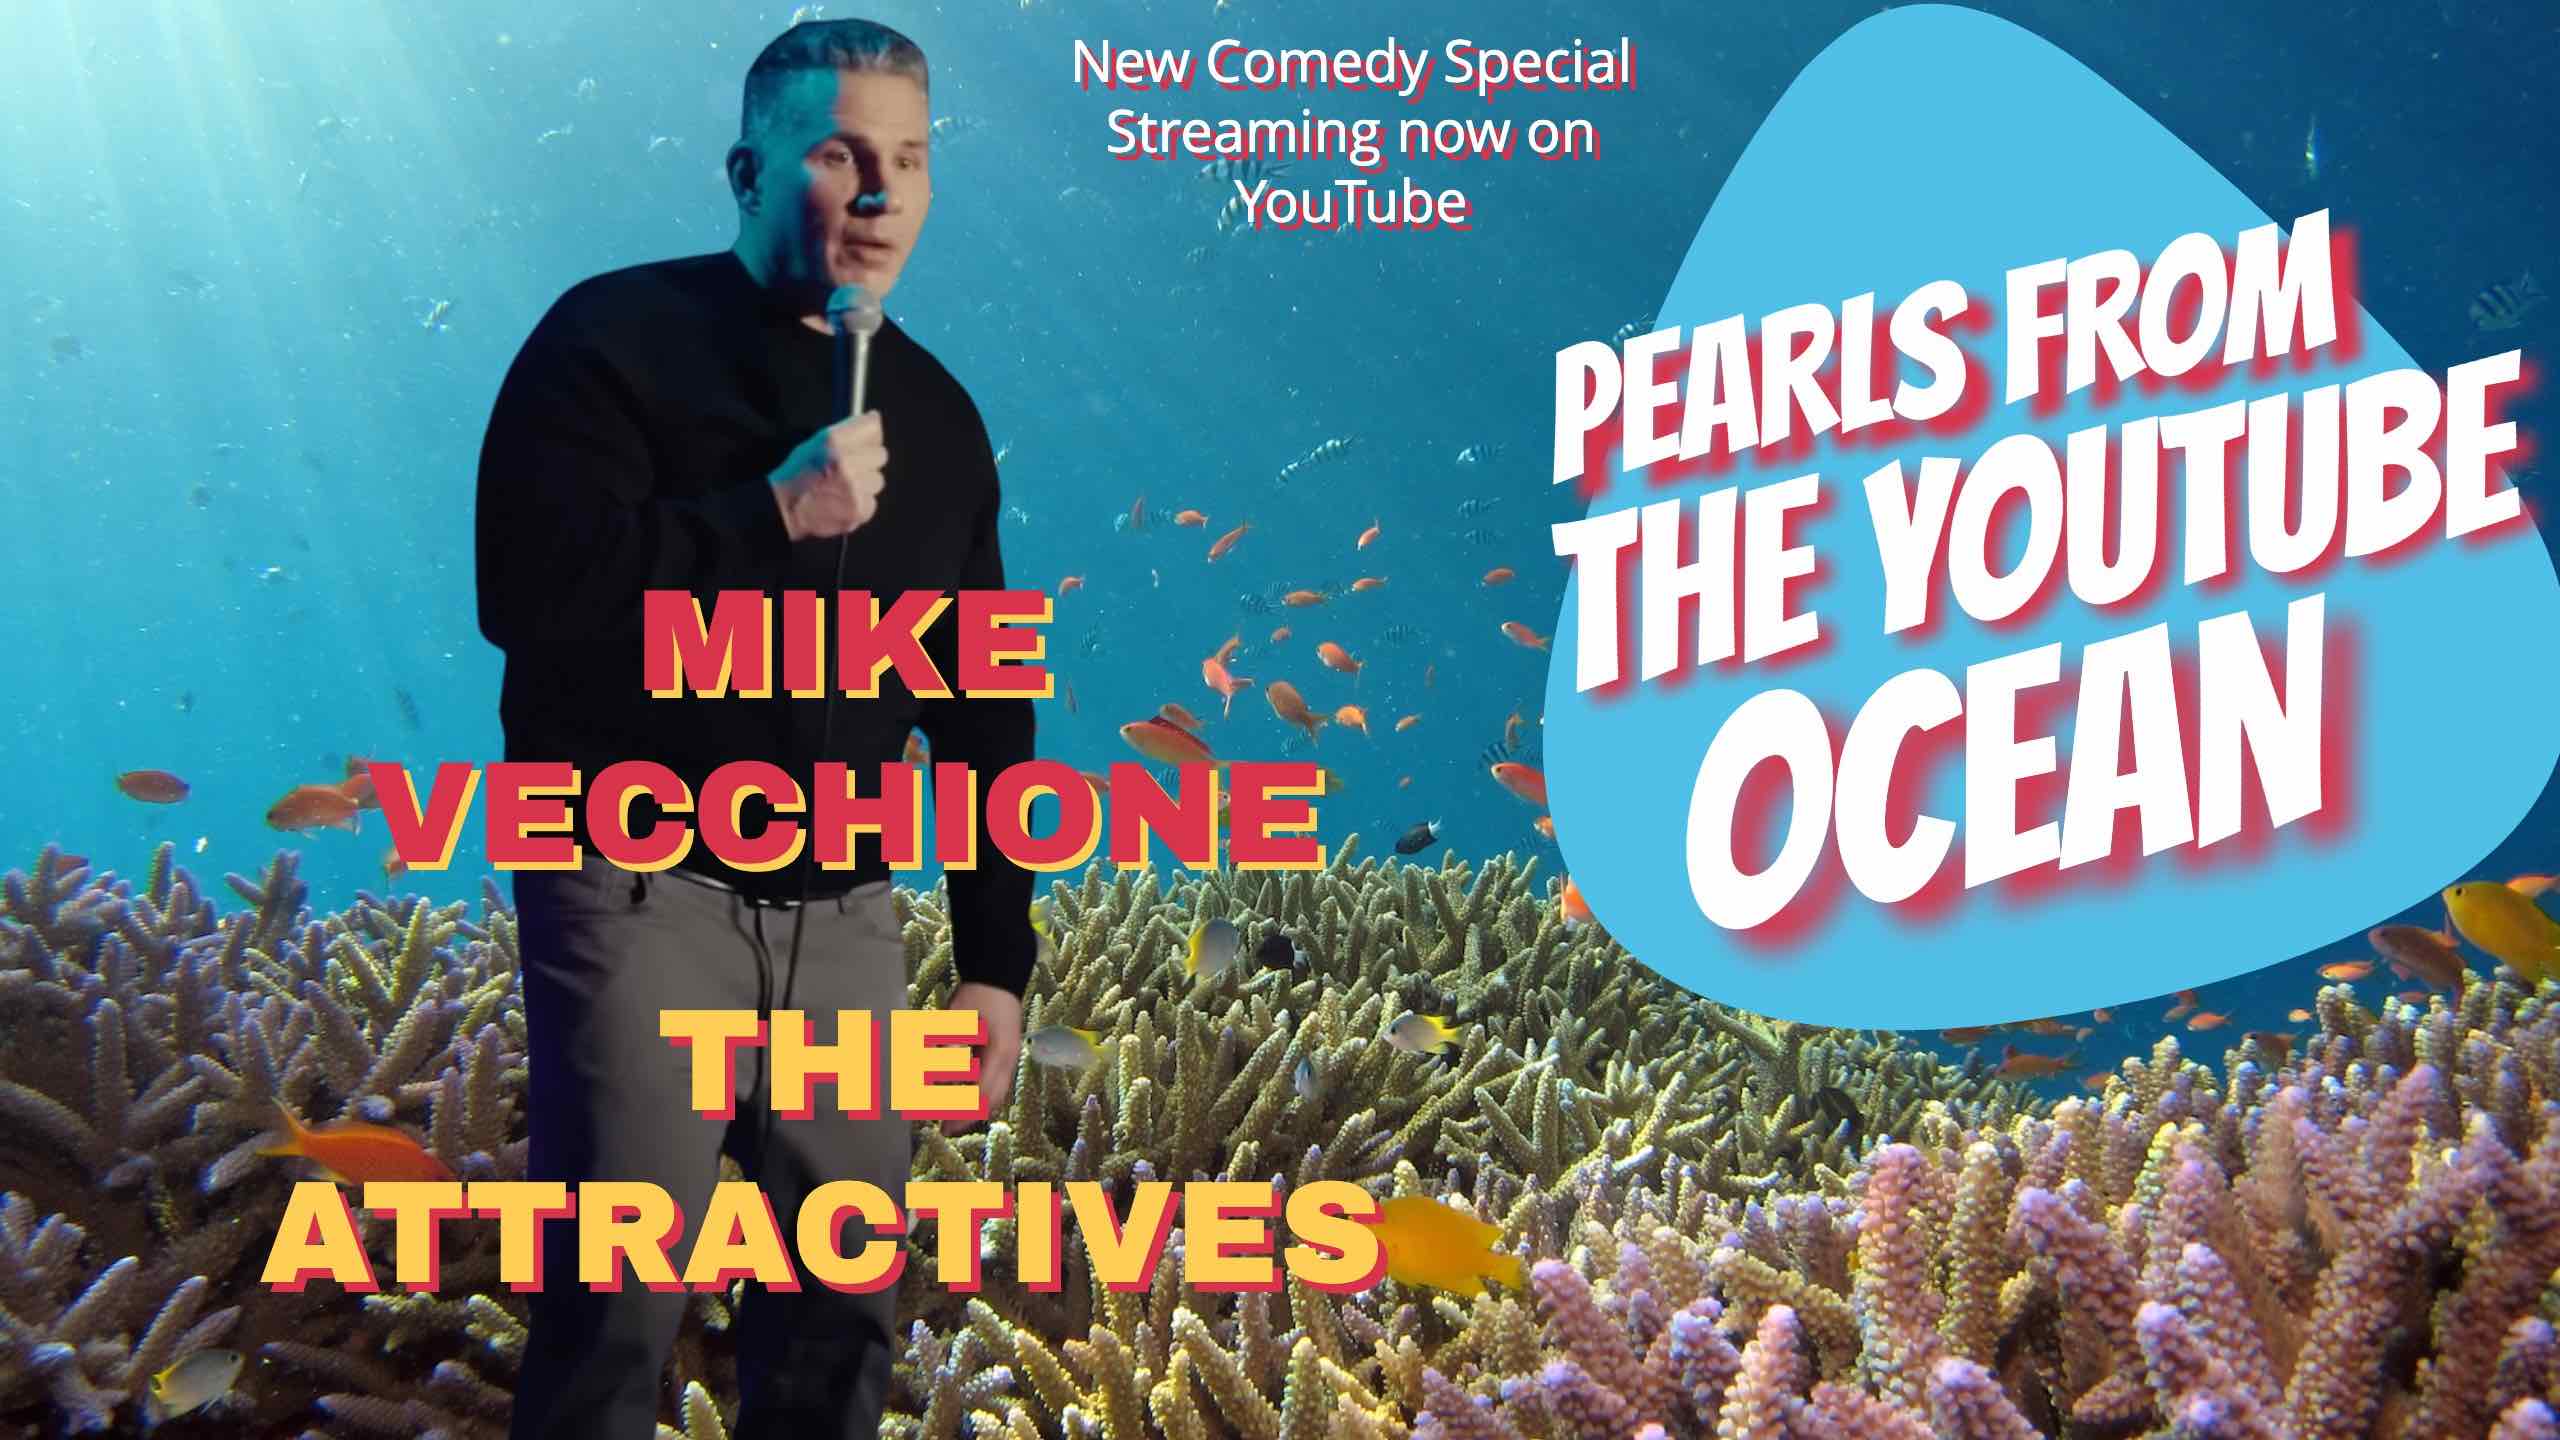 Featured image for “PEARLS FROM THE YOUTUBE OCEAN/ MIKE VECCHIONE- THE ATTRACTIVES”